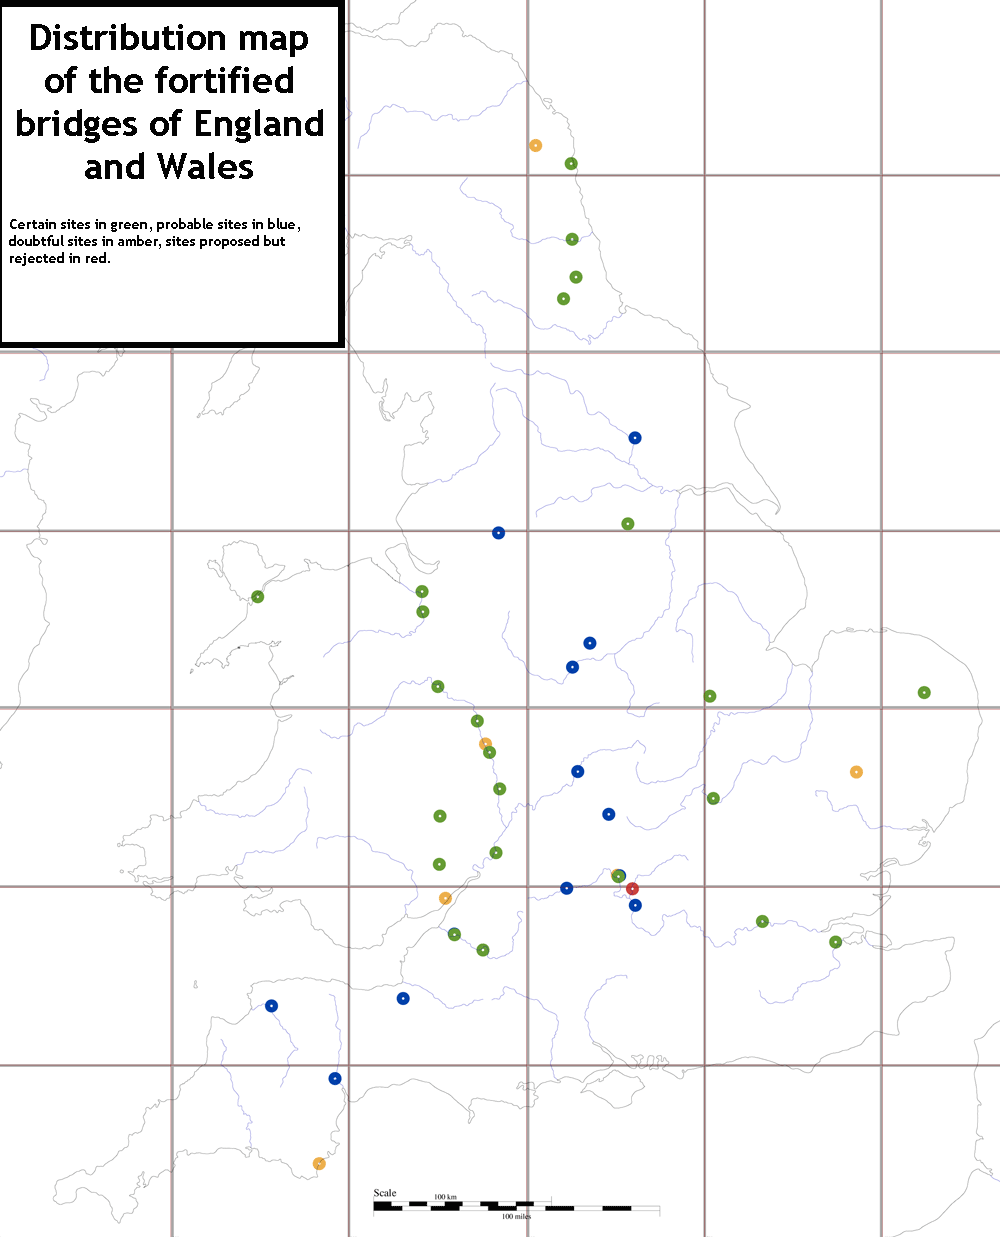 Distribution map of fortified bridges in England and Wales